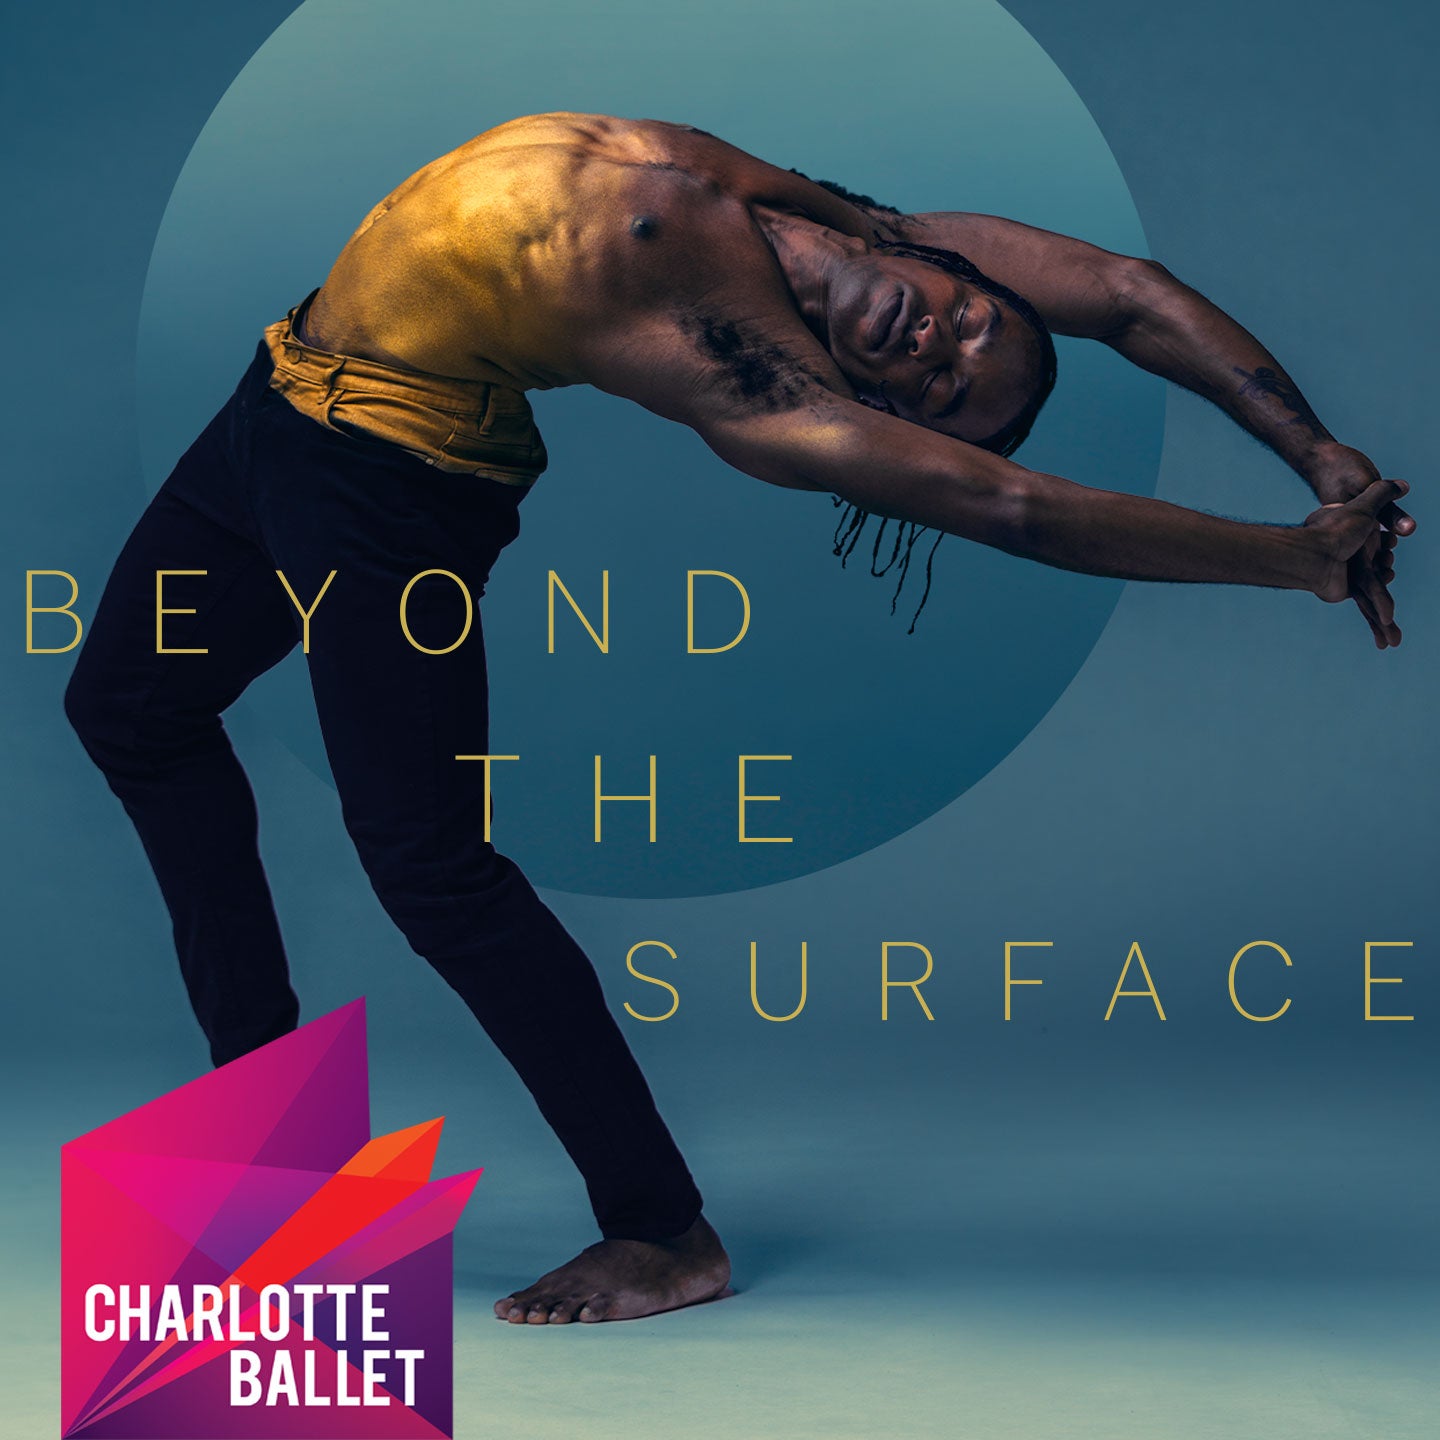 Charlotte Ballet: Beyond the Surface